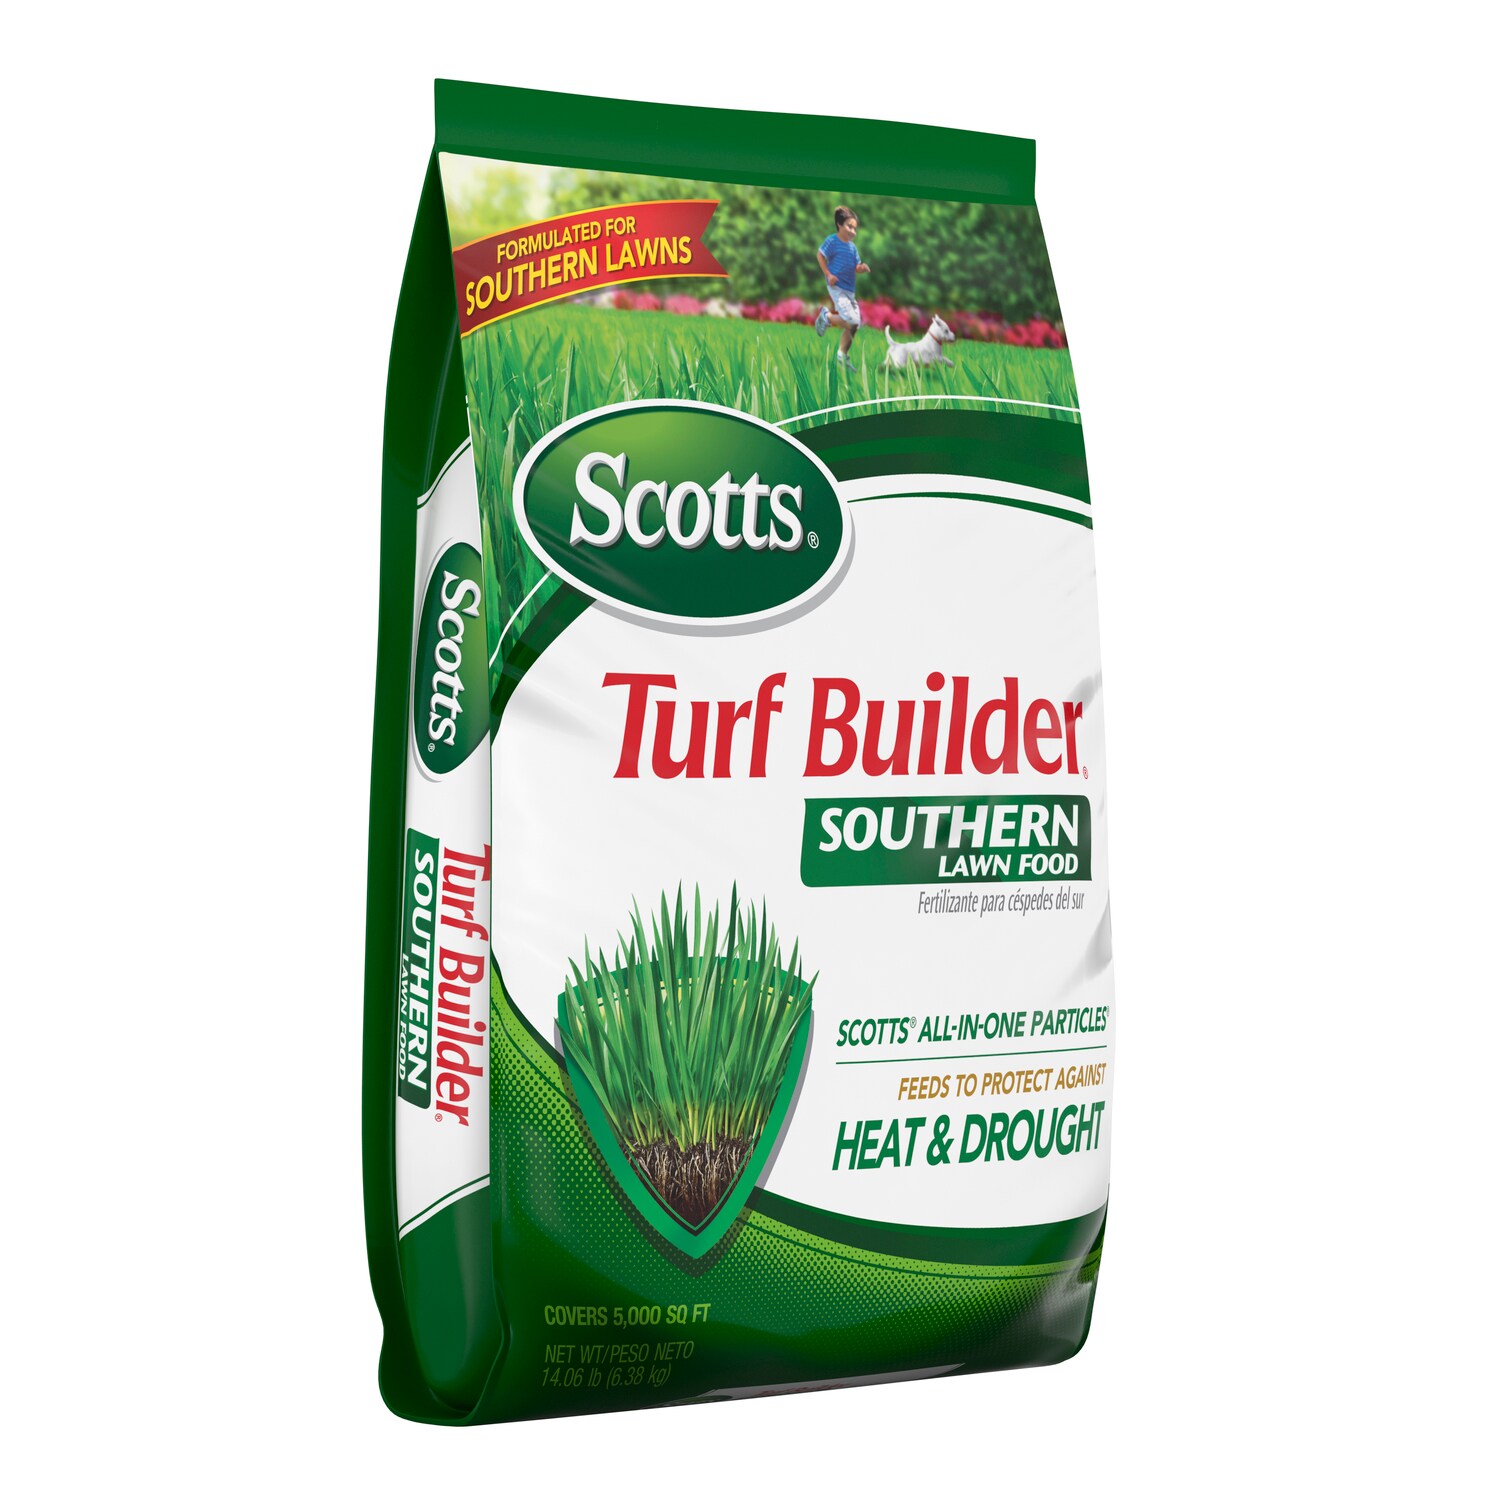 Image of Scotts Turf Builder Lawn Food fertilizer for yellow grass